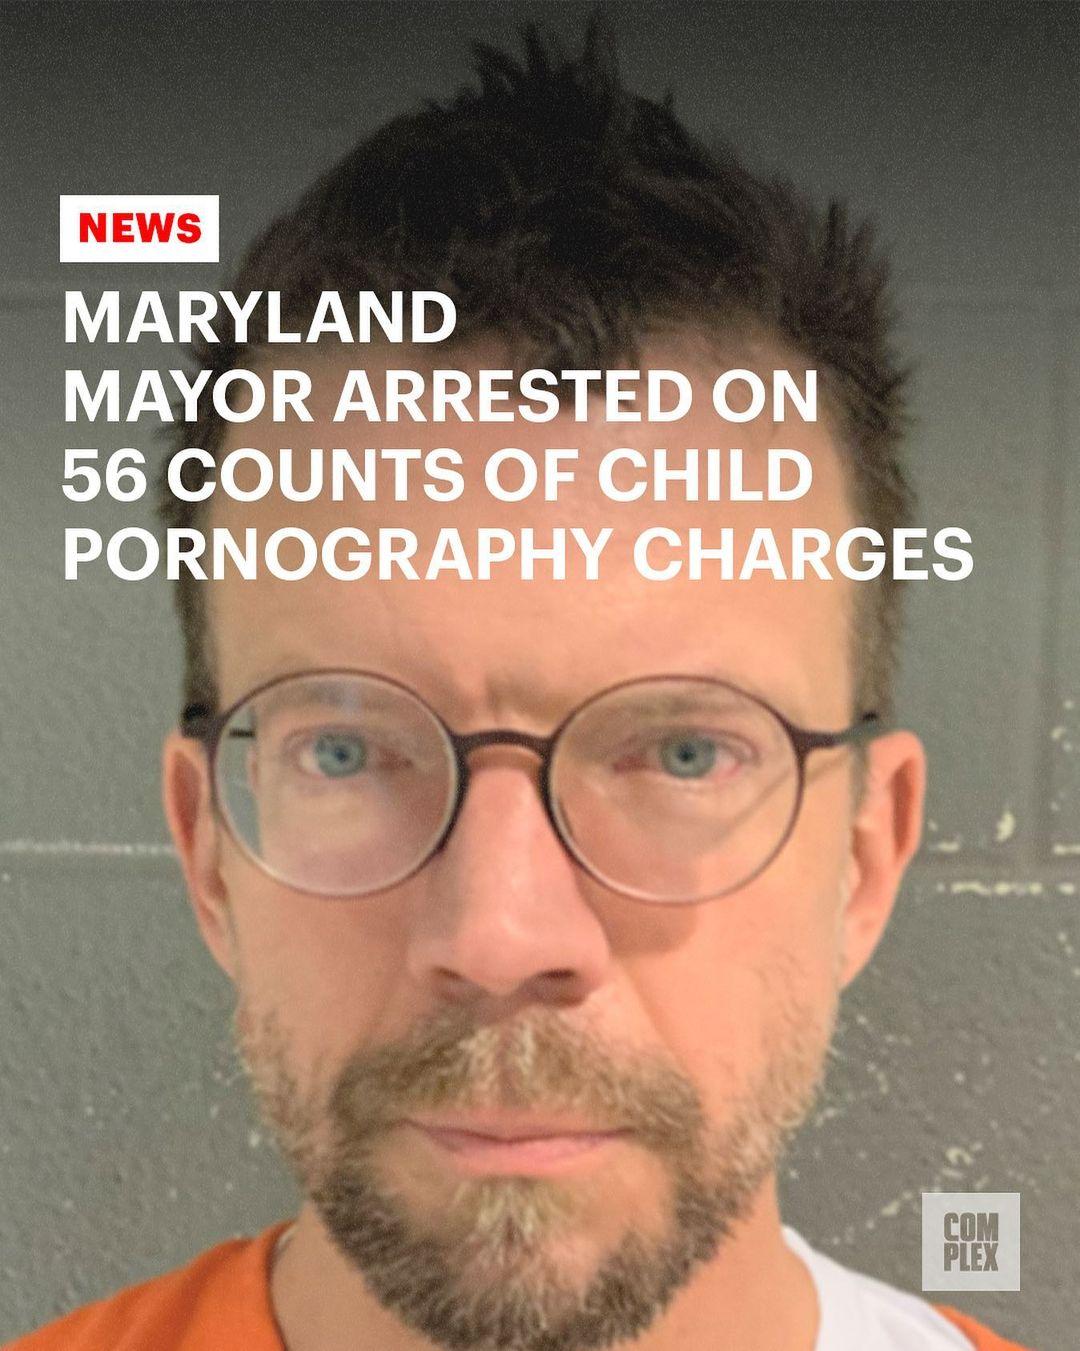 class="content__text"
 College Park, Maryland mayor Patrick Wojahn has been arrested on 56 counts of child pornography charges following a search at his home by authorities last month. Full story 🔗 link in bio. 
 